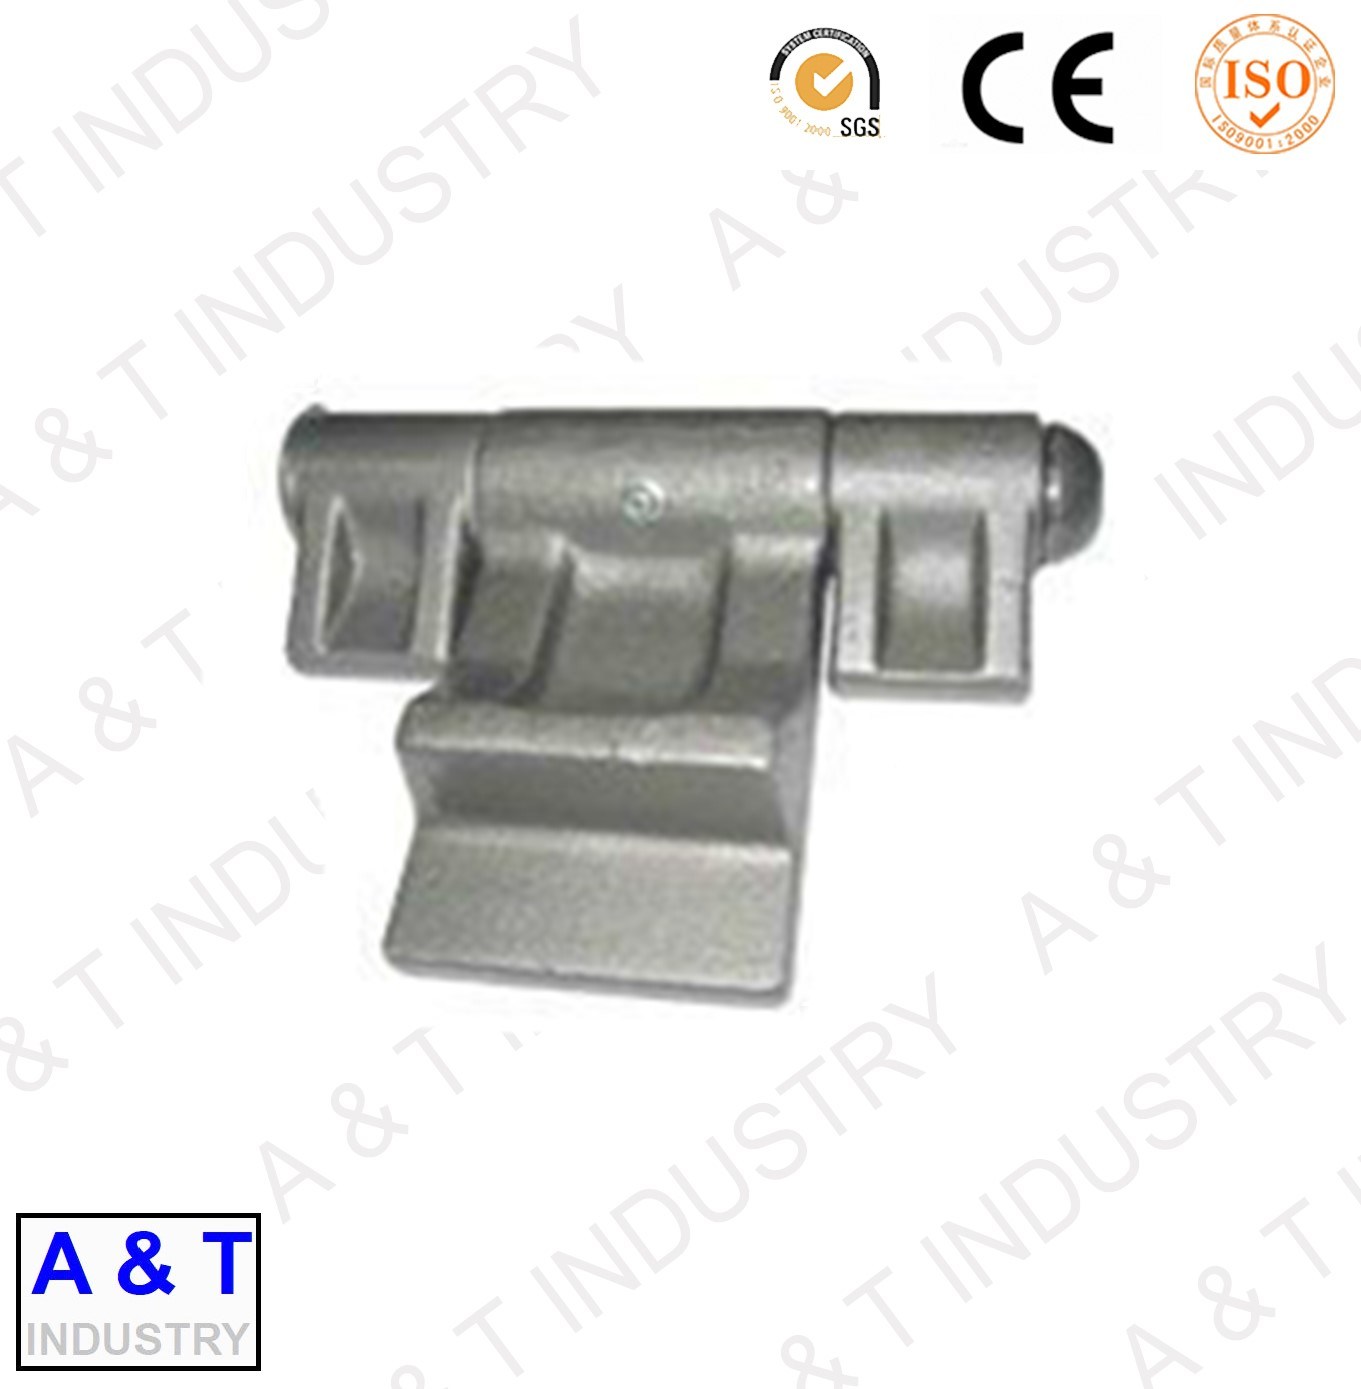 High Precise Forging Parts Hinge with High Quality